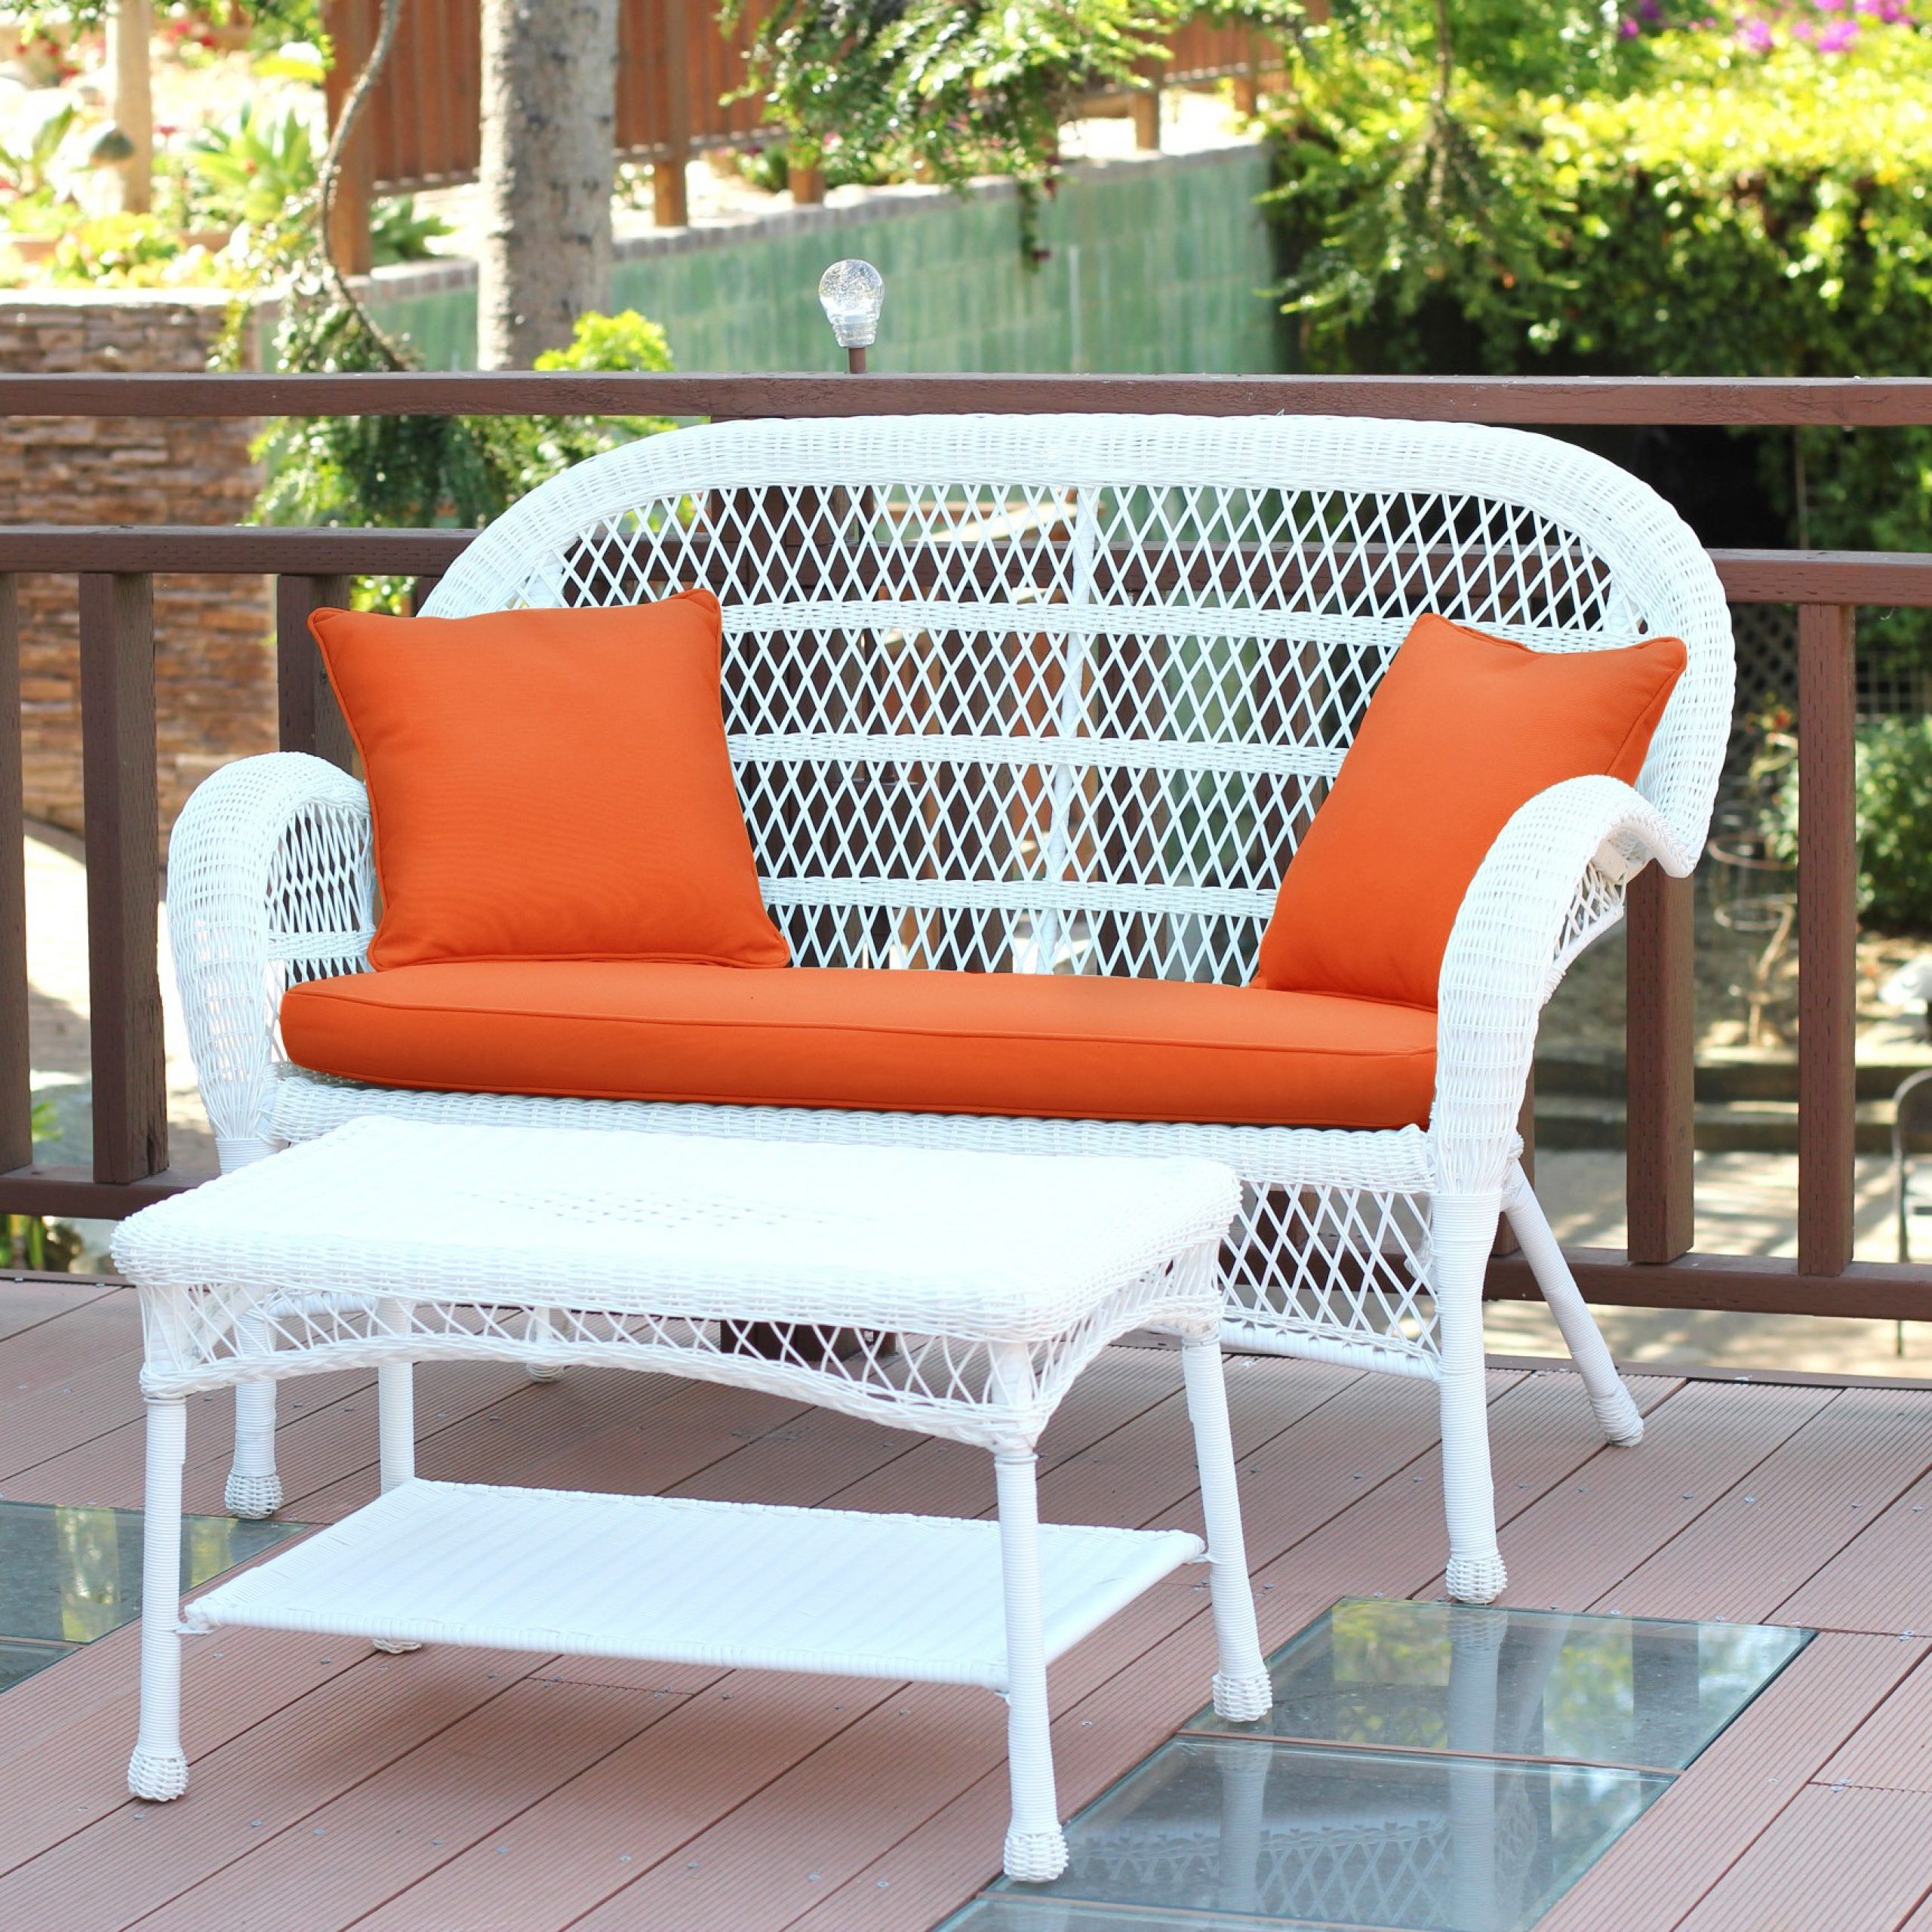 Well Known Outdoor Wicker Orange Cushion Patio Sets With Regard To Santa Maria White Wicker Patio Love Seat And Coffee Table Set – Orange (View 7 of 15)